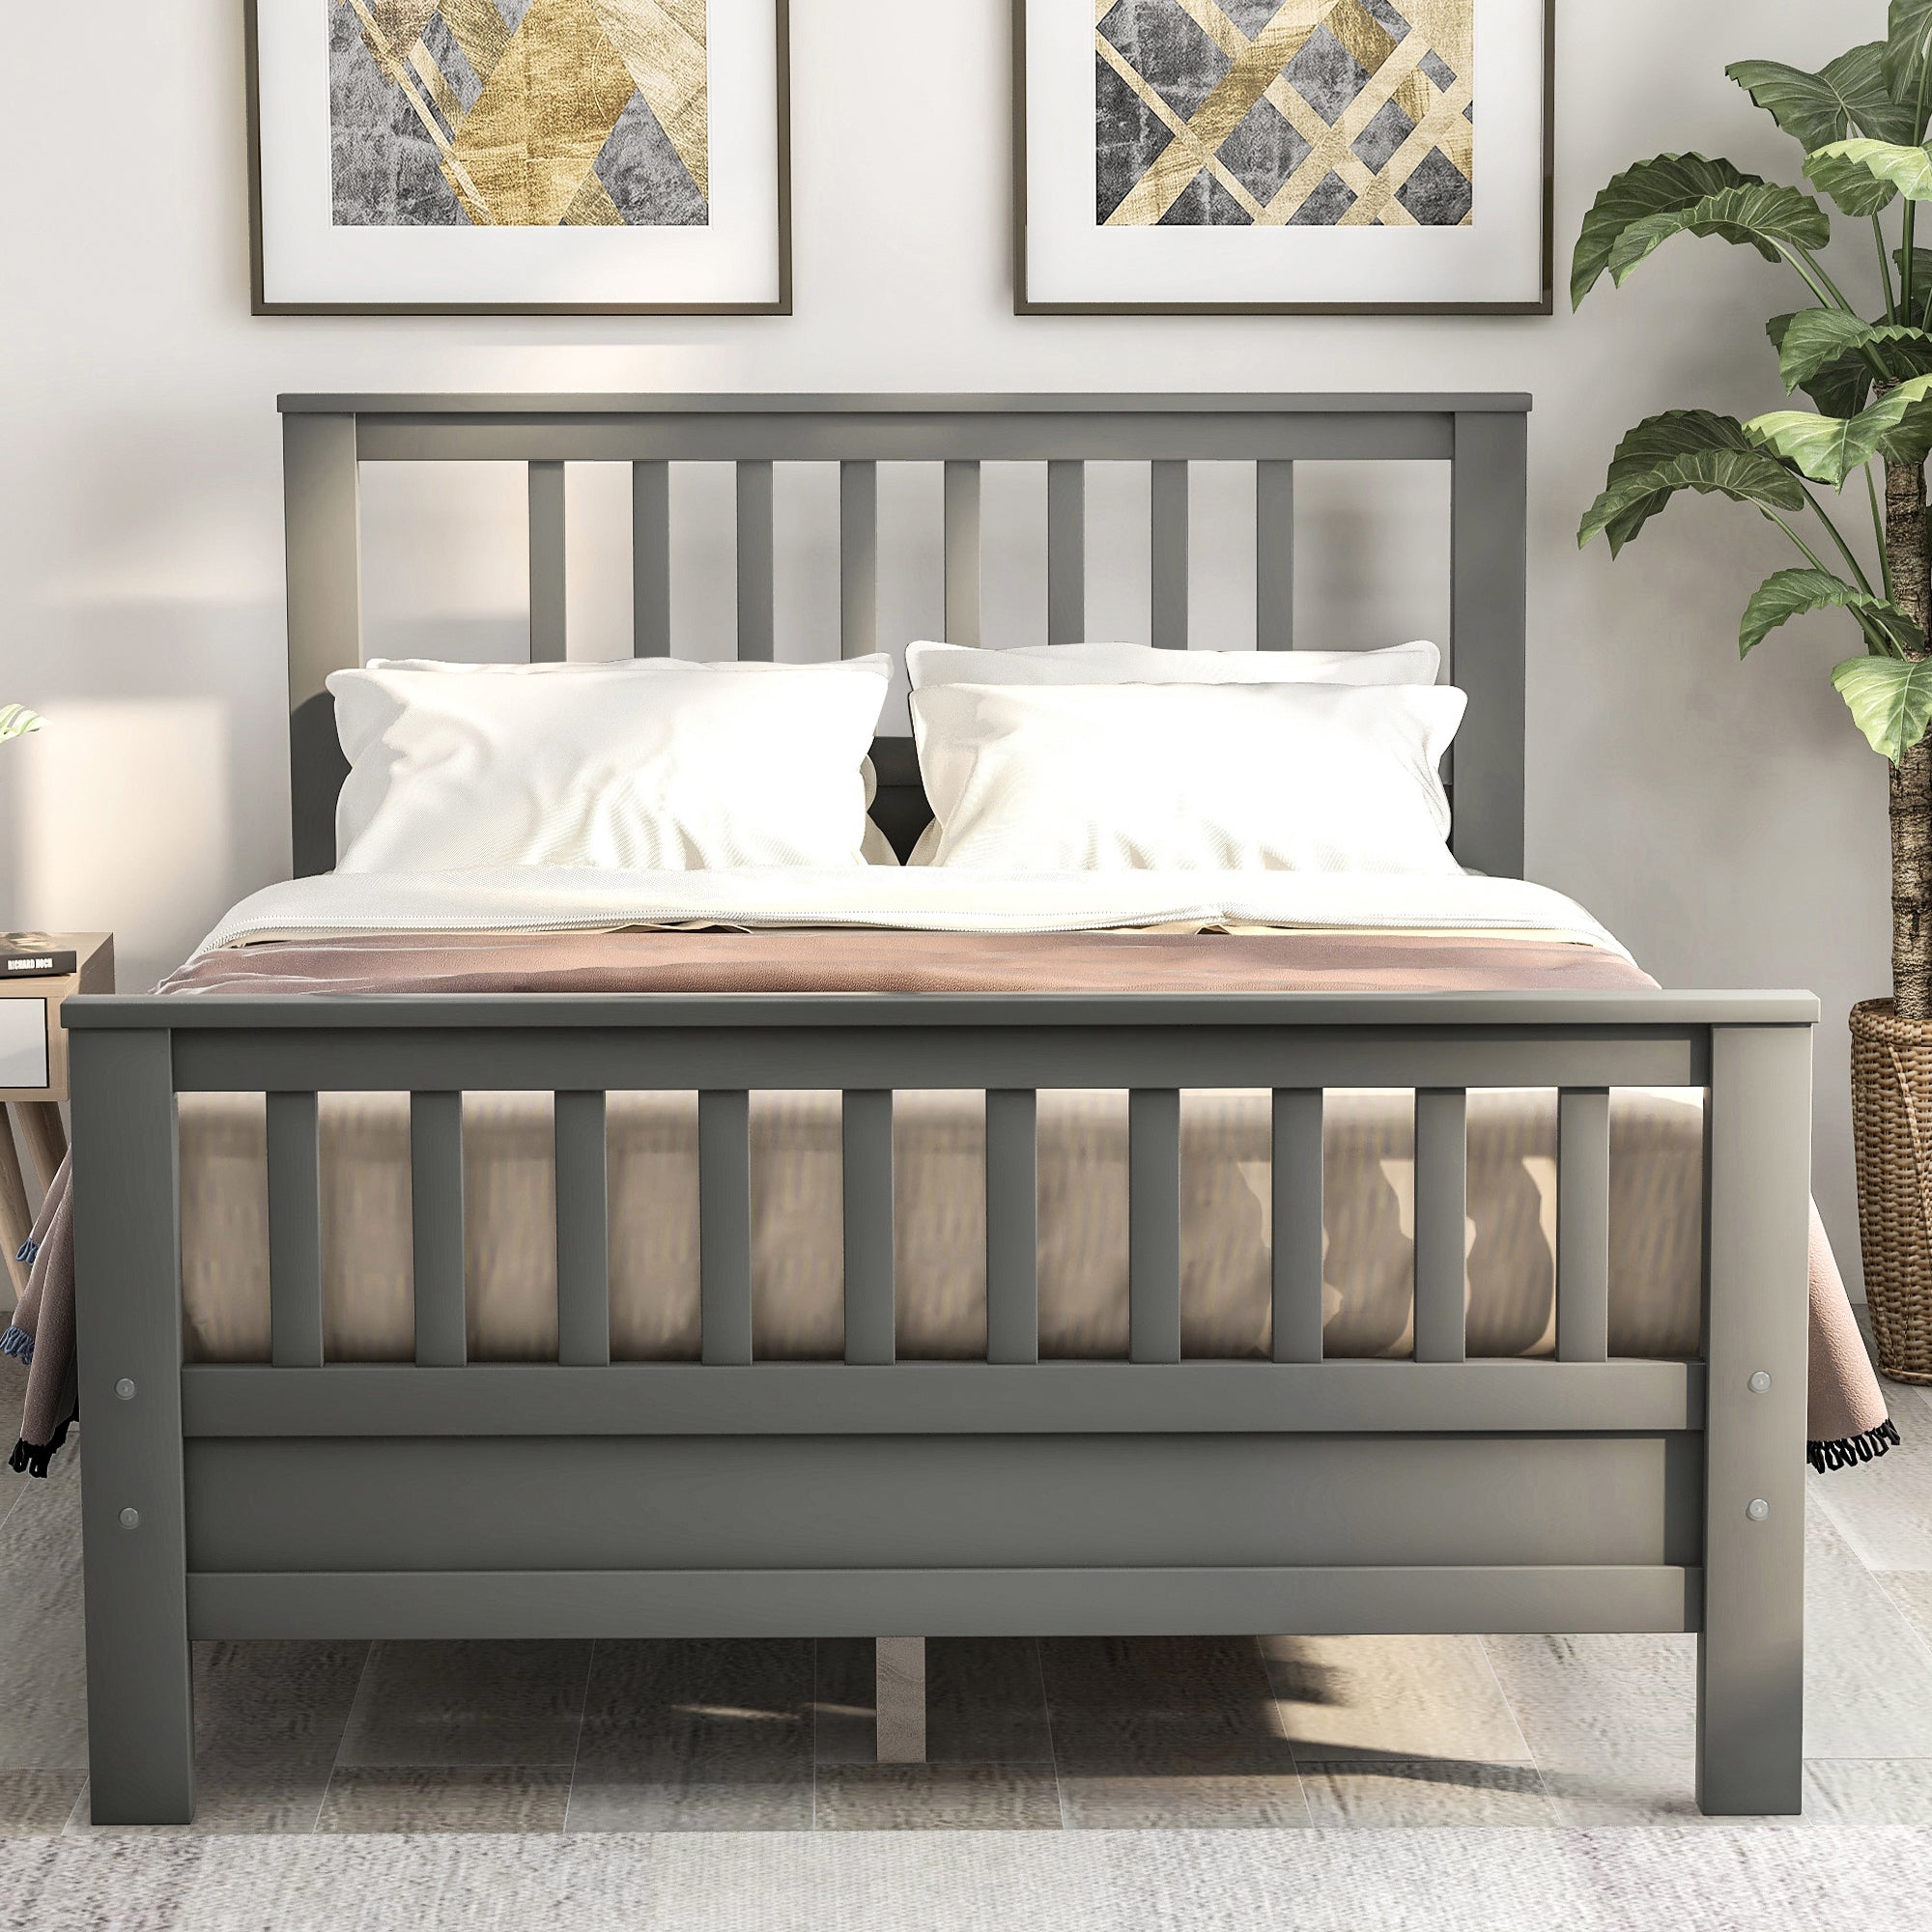 Wooden Platform Bed with Headboard and Footboard in Gray by: Alabama Beds